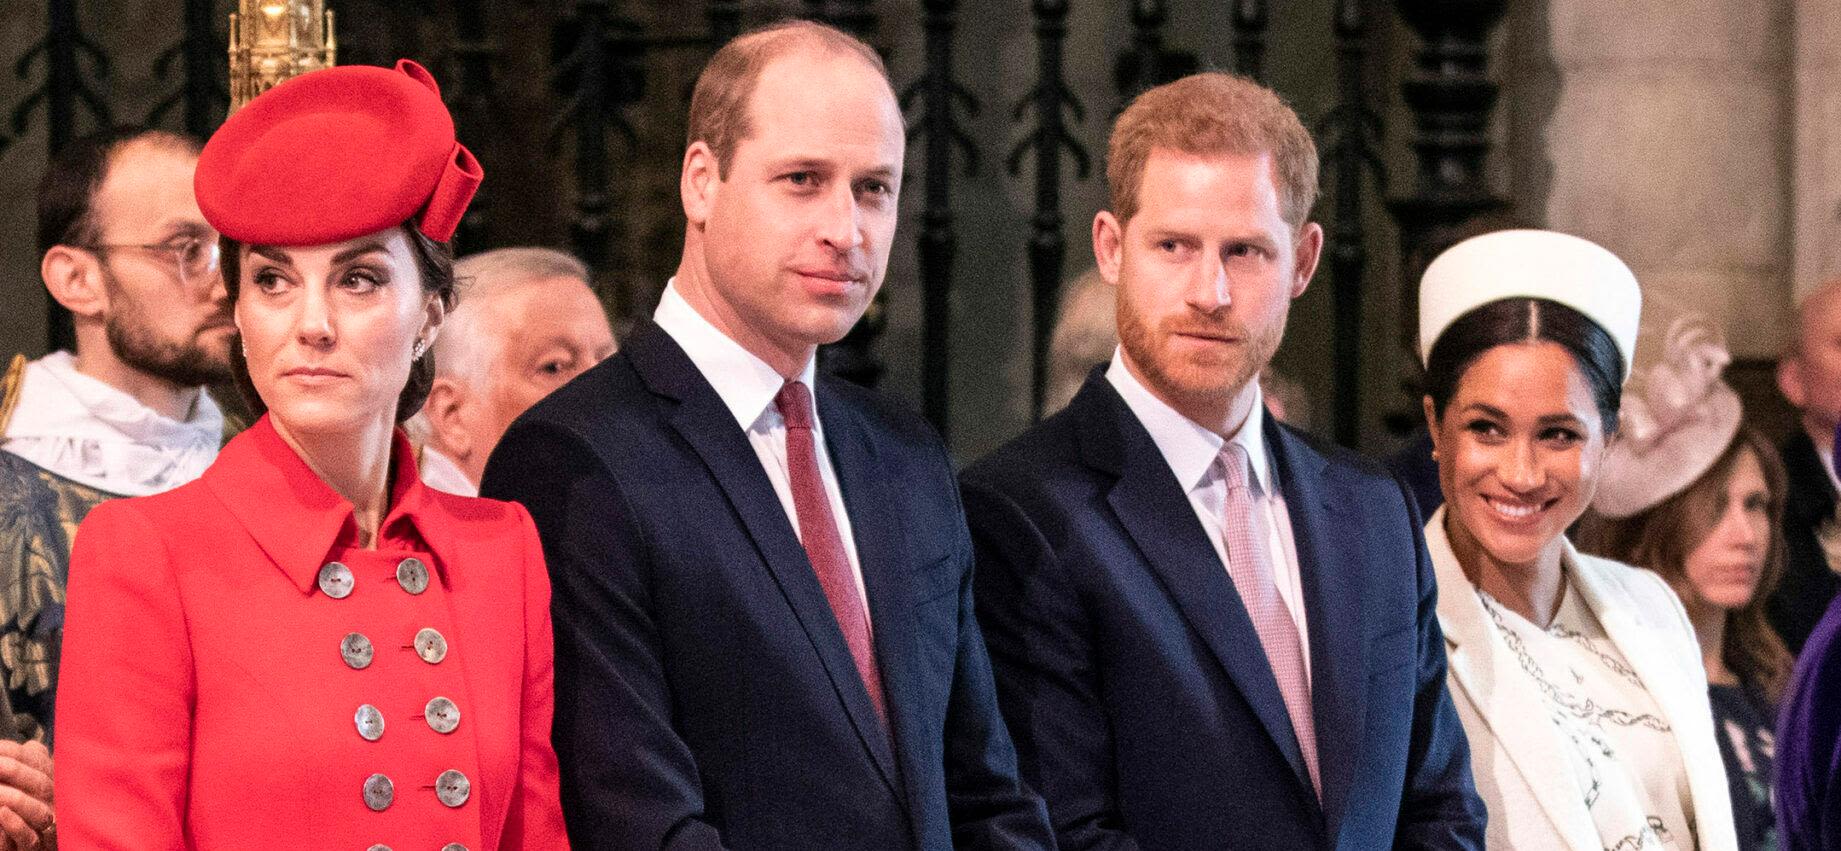 Prince William Reportedly Won't 'Soften' Stance Against Harry As He Did The 'Unthinkable'